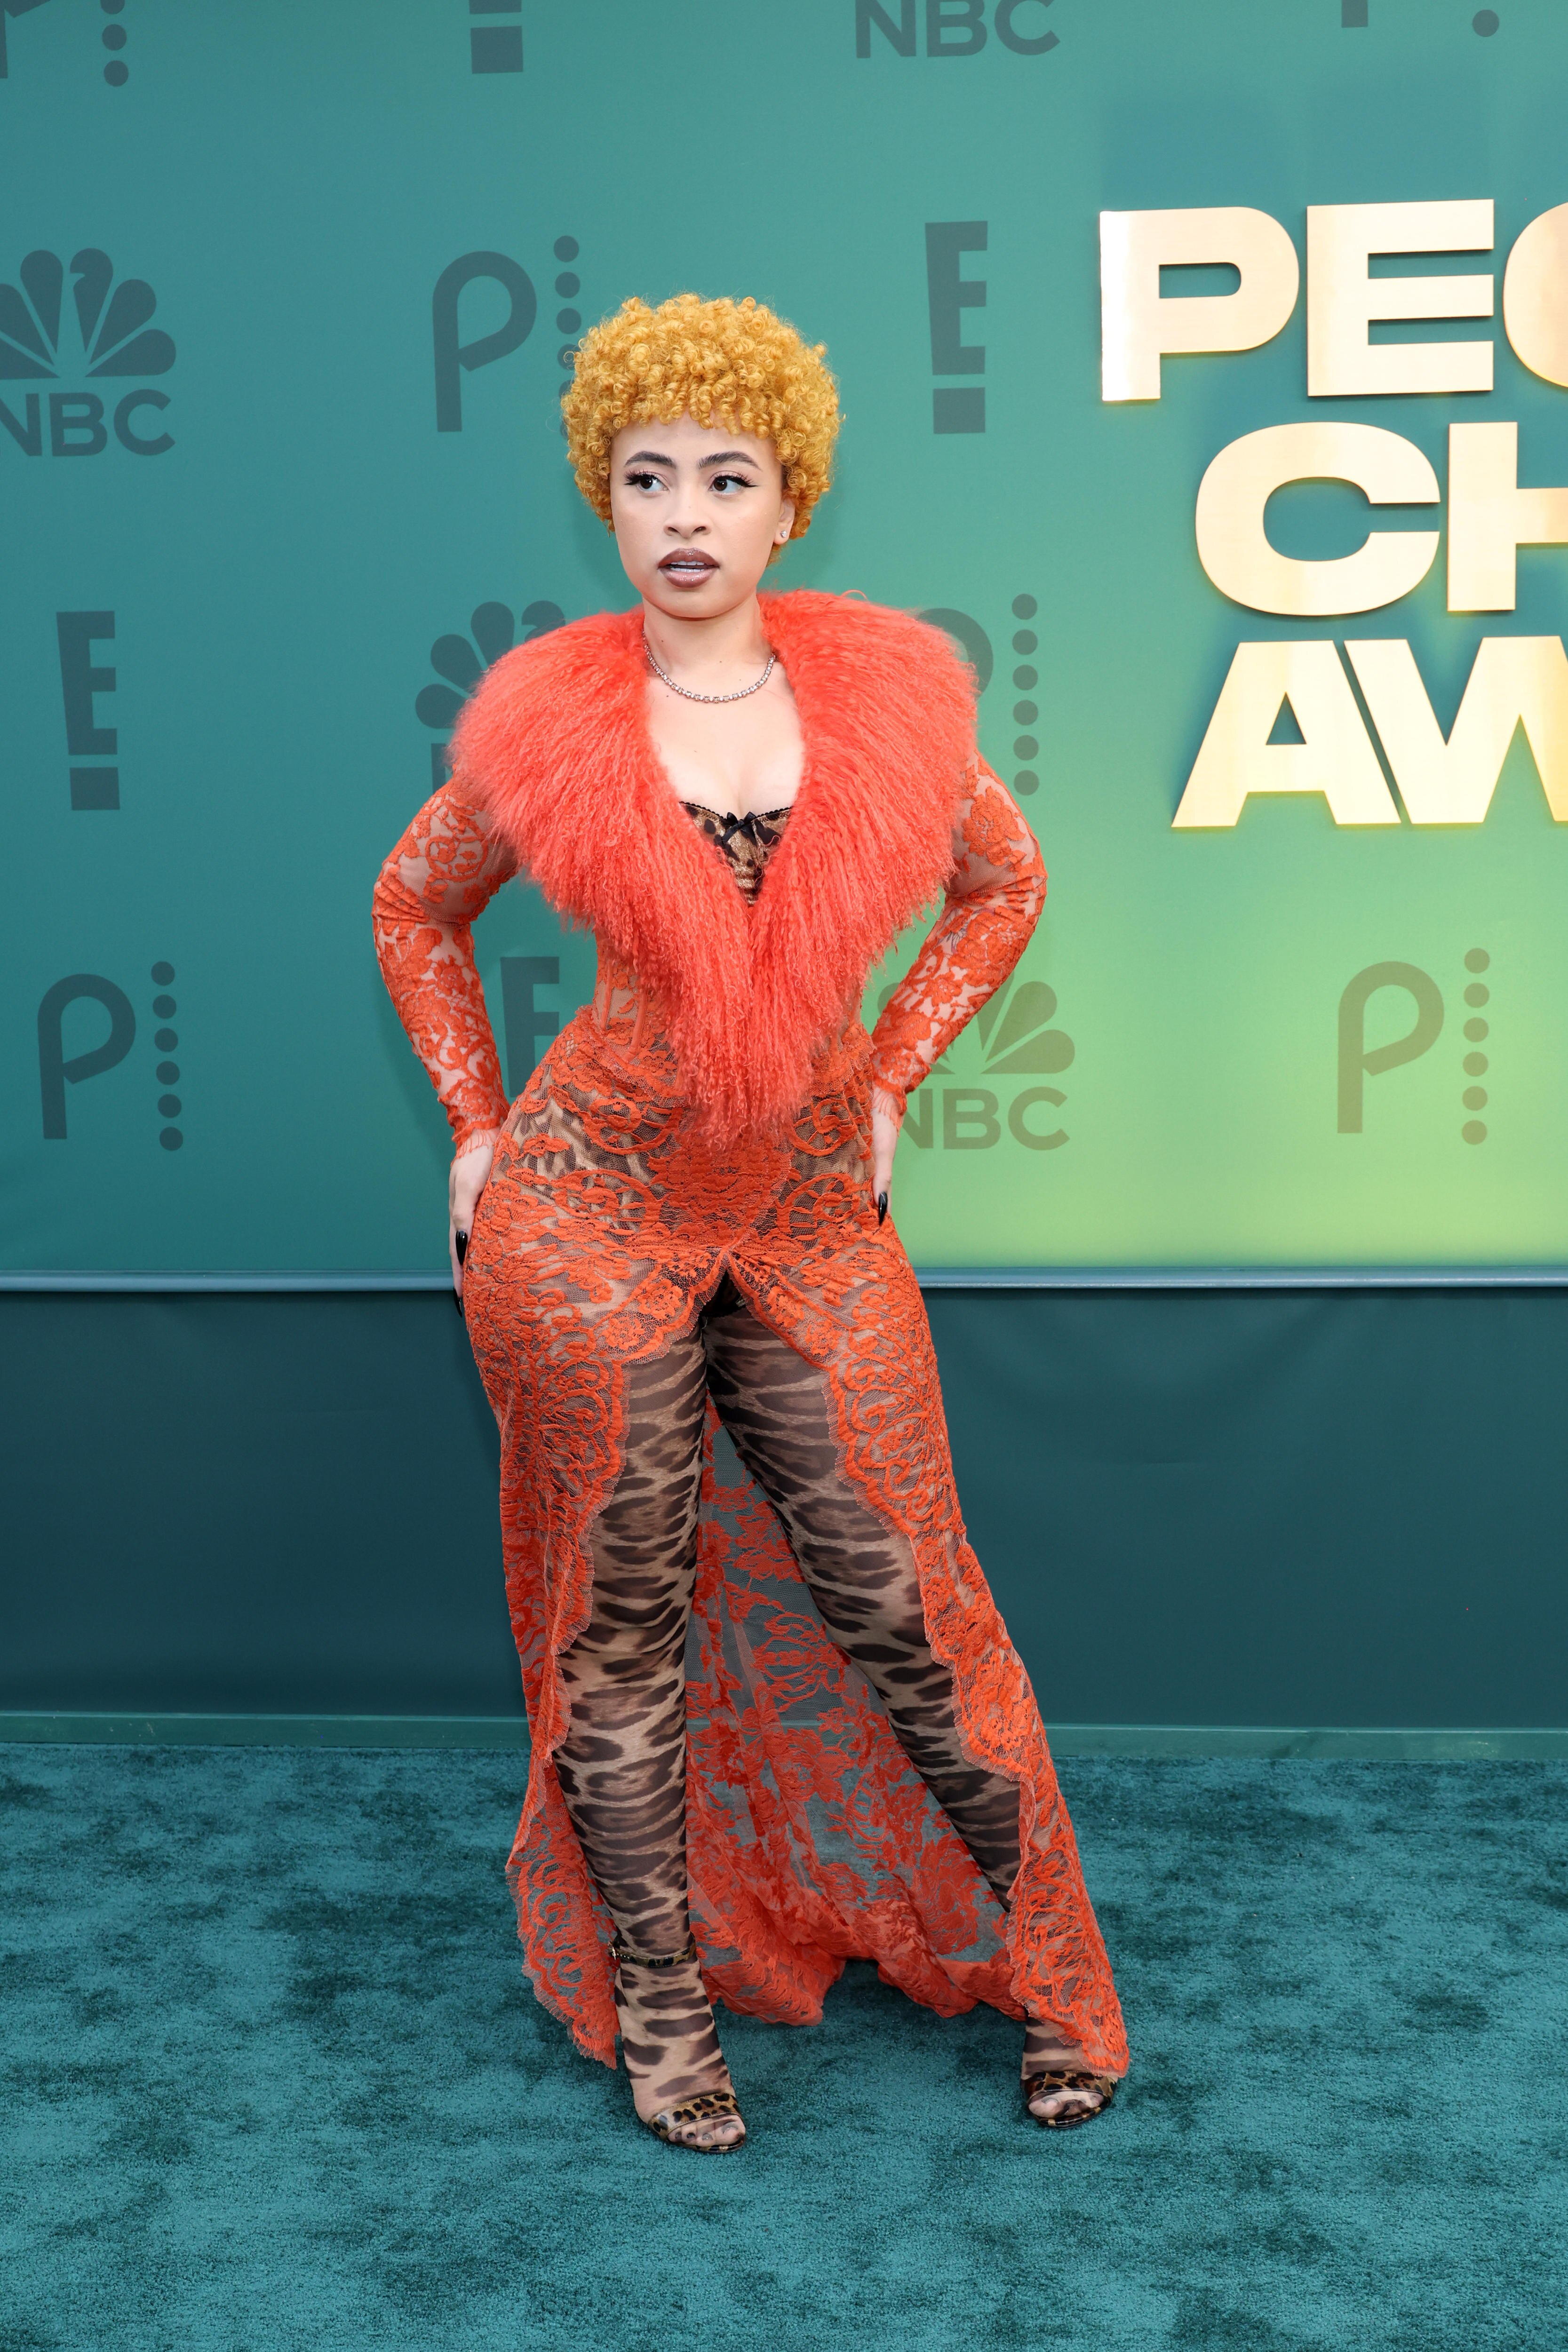 Ice Spice on the red carpet with a leopard print bodice and an orange furry piece on top